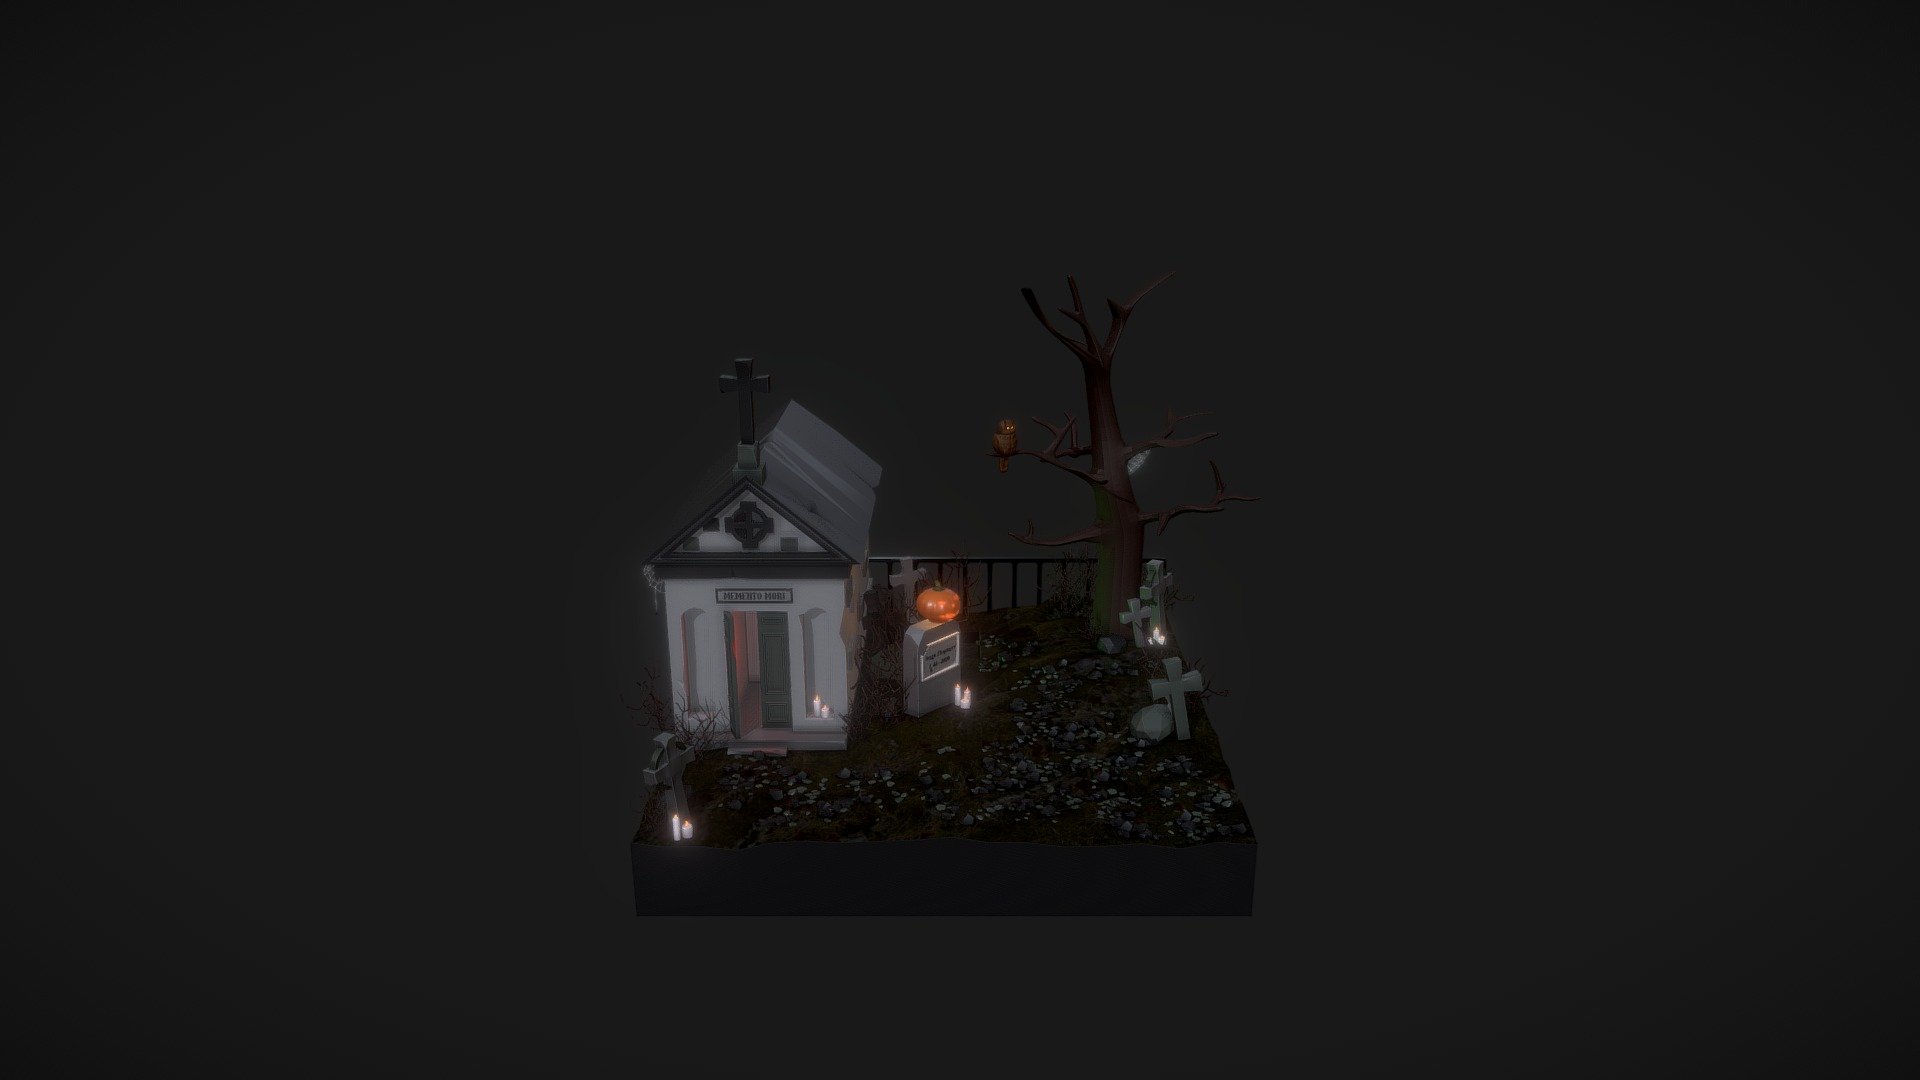 Low poly 3D scene of a cemetery for Hallowen 2020.

This scene has the animation - you can check it on my Instagram account:
https://www.instagram.com/p/CHA4u9LqBYB/ - Spooky Halloween Cemetery - 3D model by Eva Gelia (@evagelia) 3d model